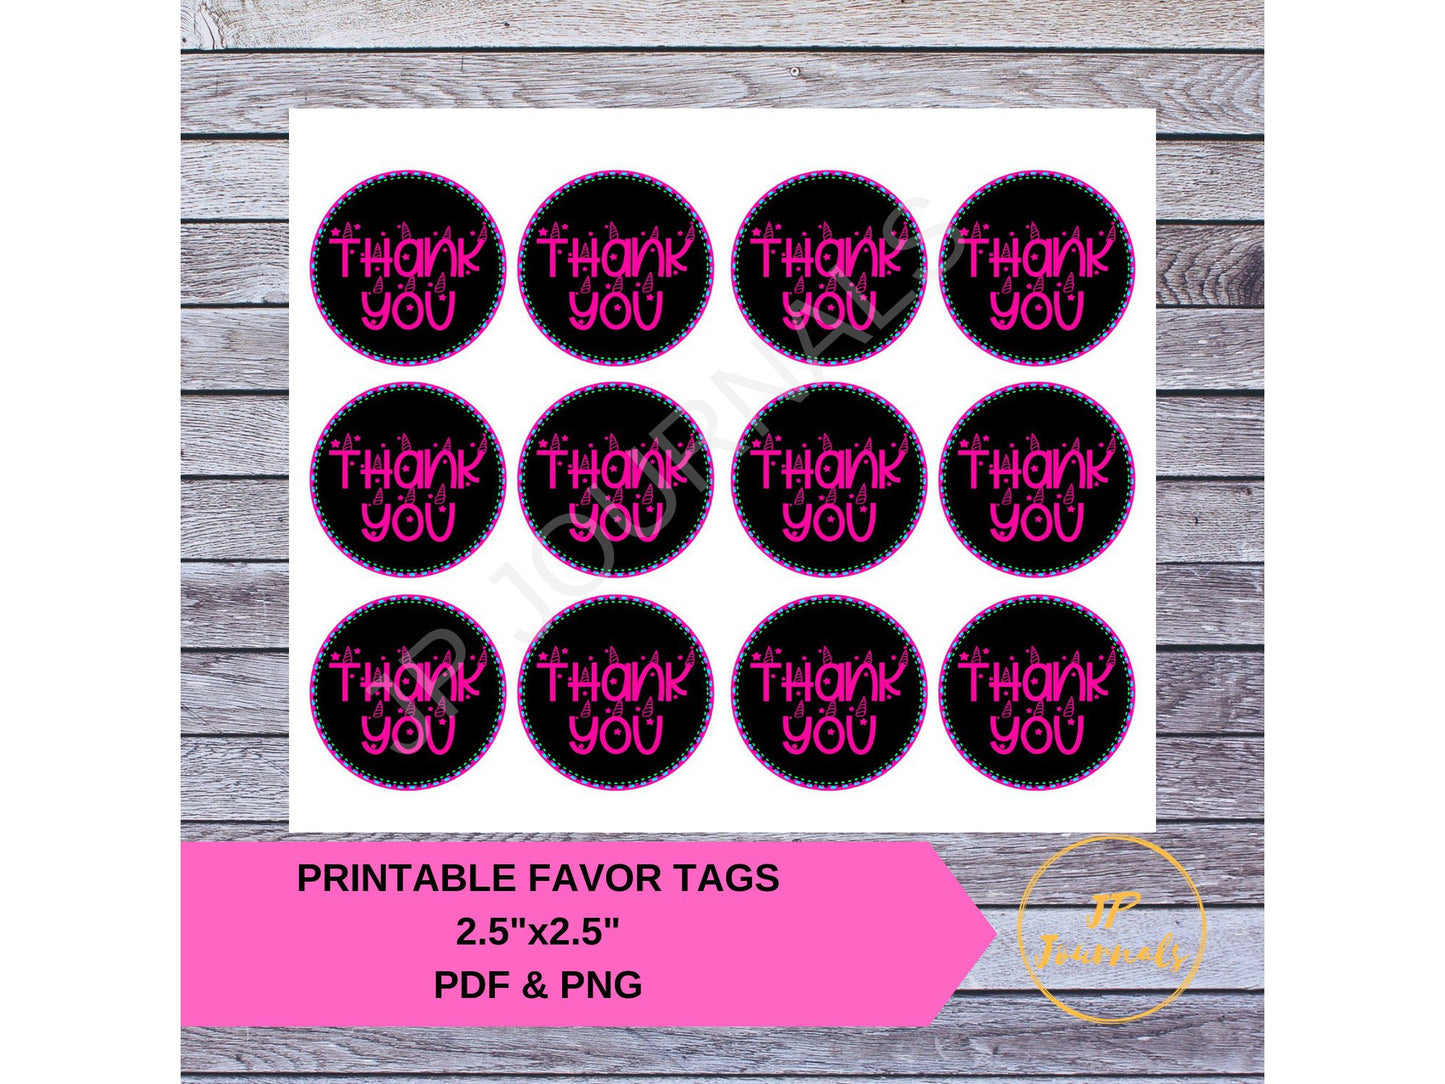 Unicorn Neon Glow Birthday Party Thank You Printable Party Favor Tags DIY Print at Home Label Favor Tags PDF PNG Pink Black Purple Green